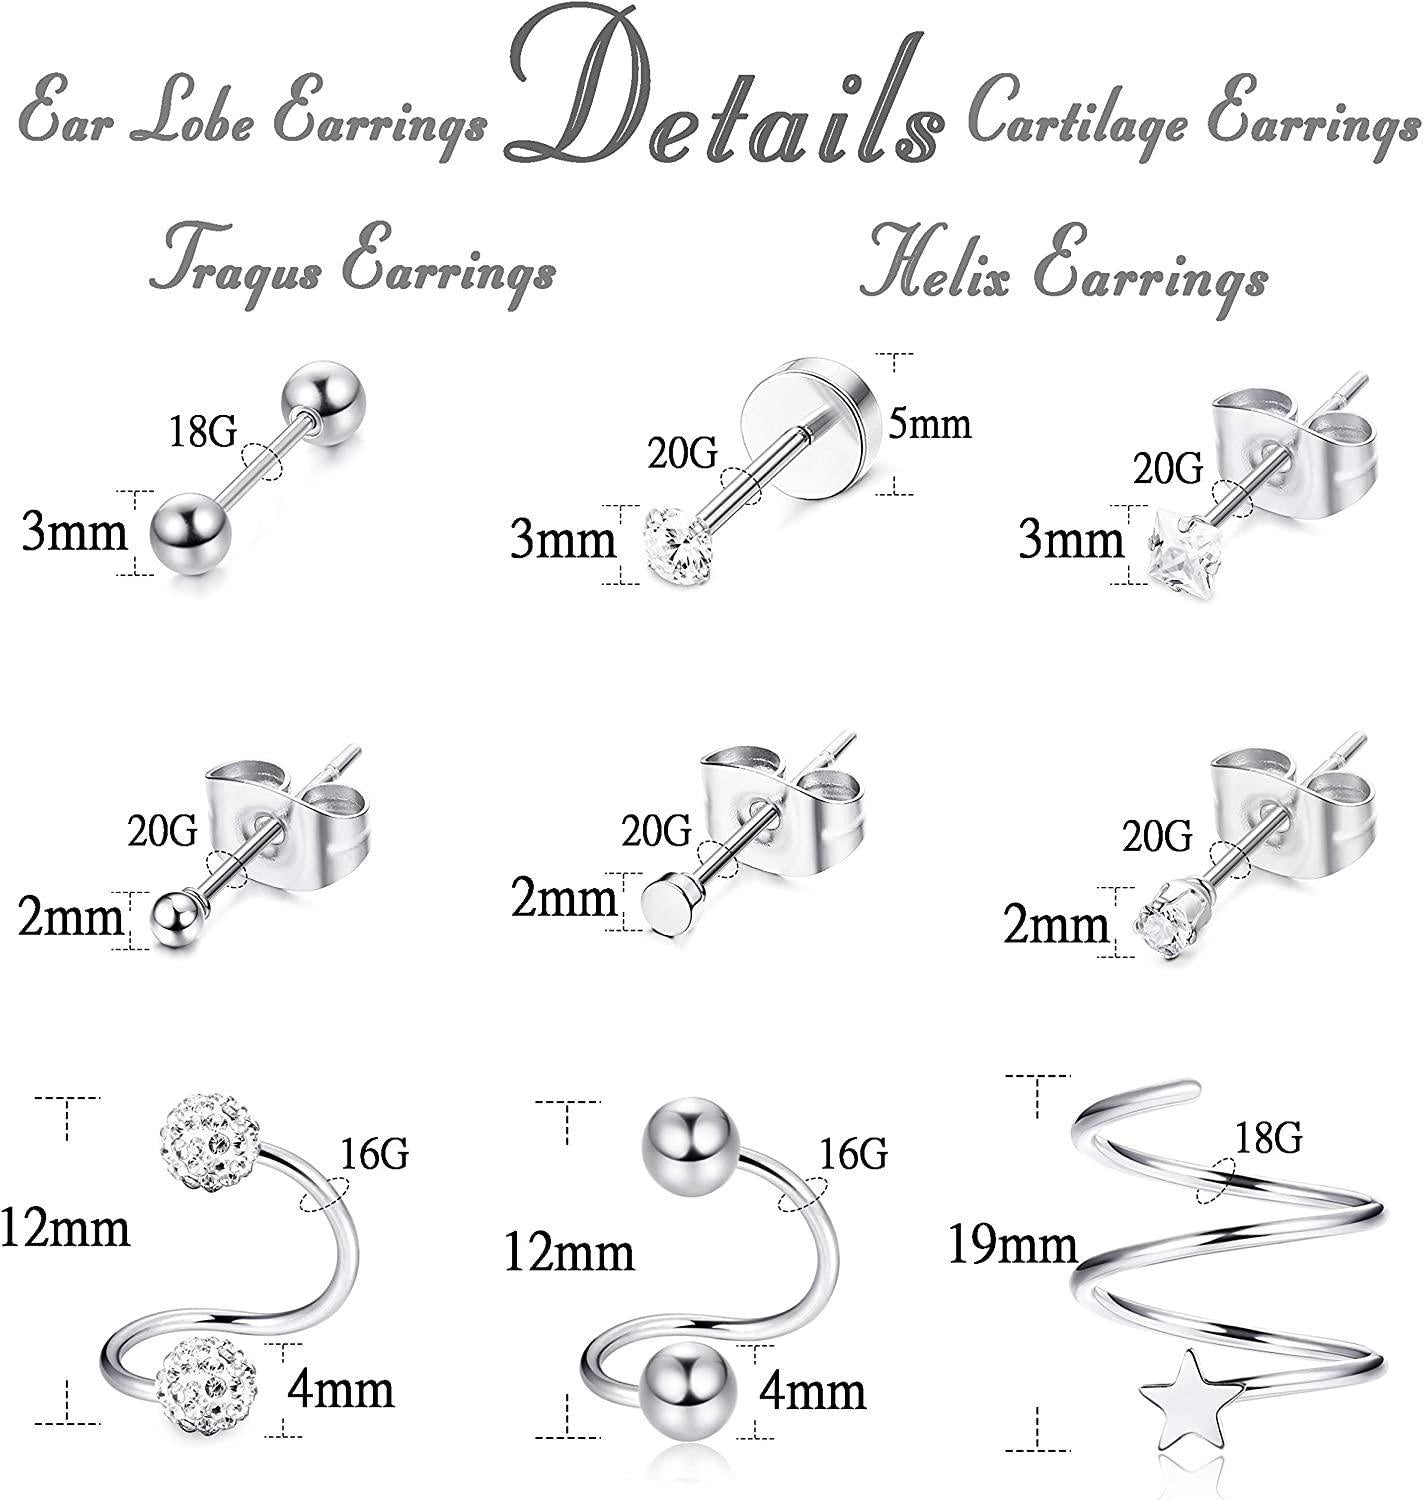 Stainless Ear Cartilage Earrings Hoops for Men Women Tiny Stud Earrings Ball CZ Inlaid Cartilage Stud Tragus Conch Helix Spiral Barbell Piercing Jewelry